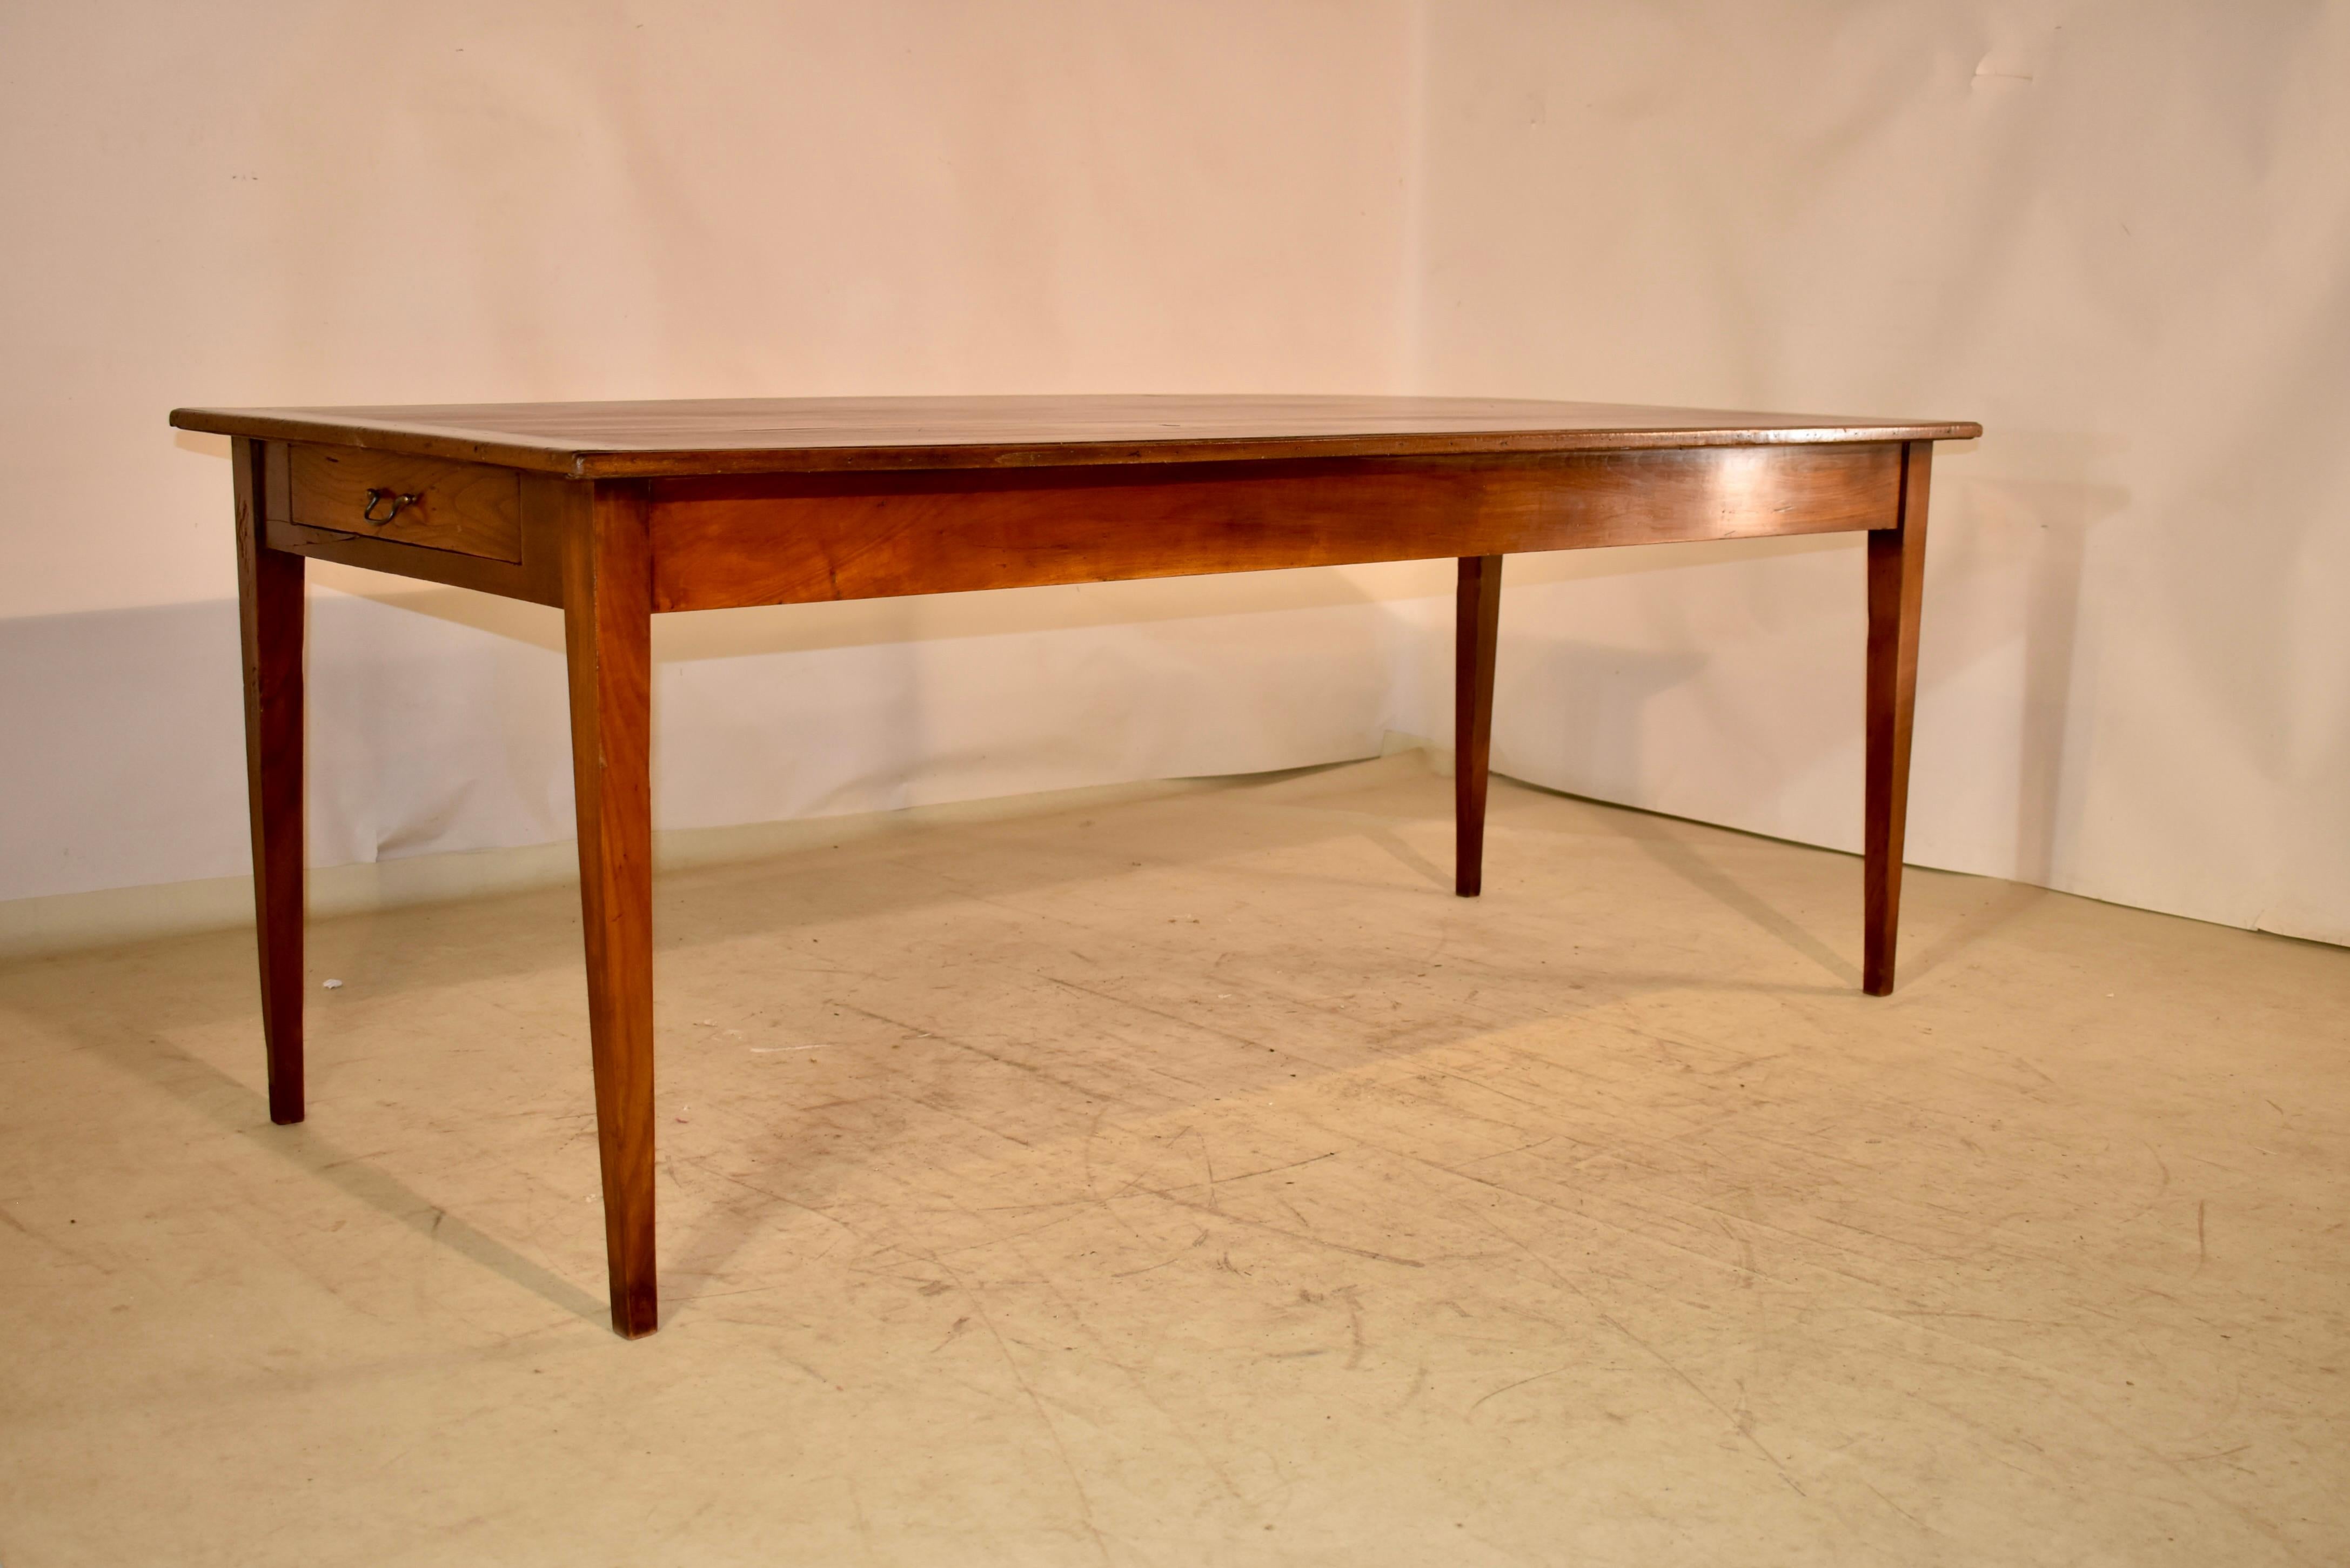 19th Century Chestnut Farm Table from France In Good Condition For Sale In High Point, NC